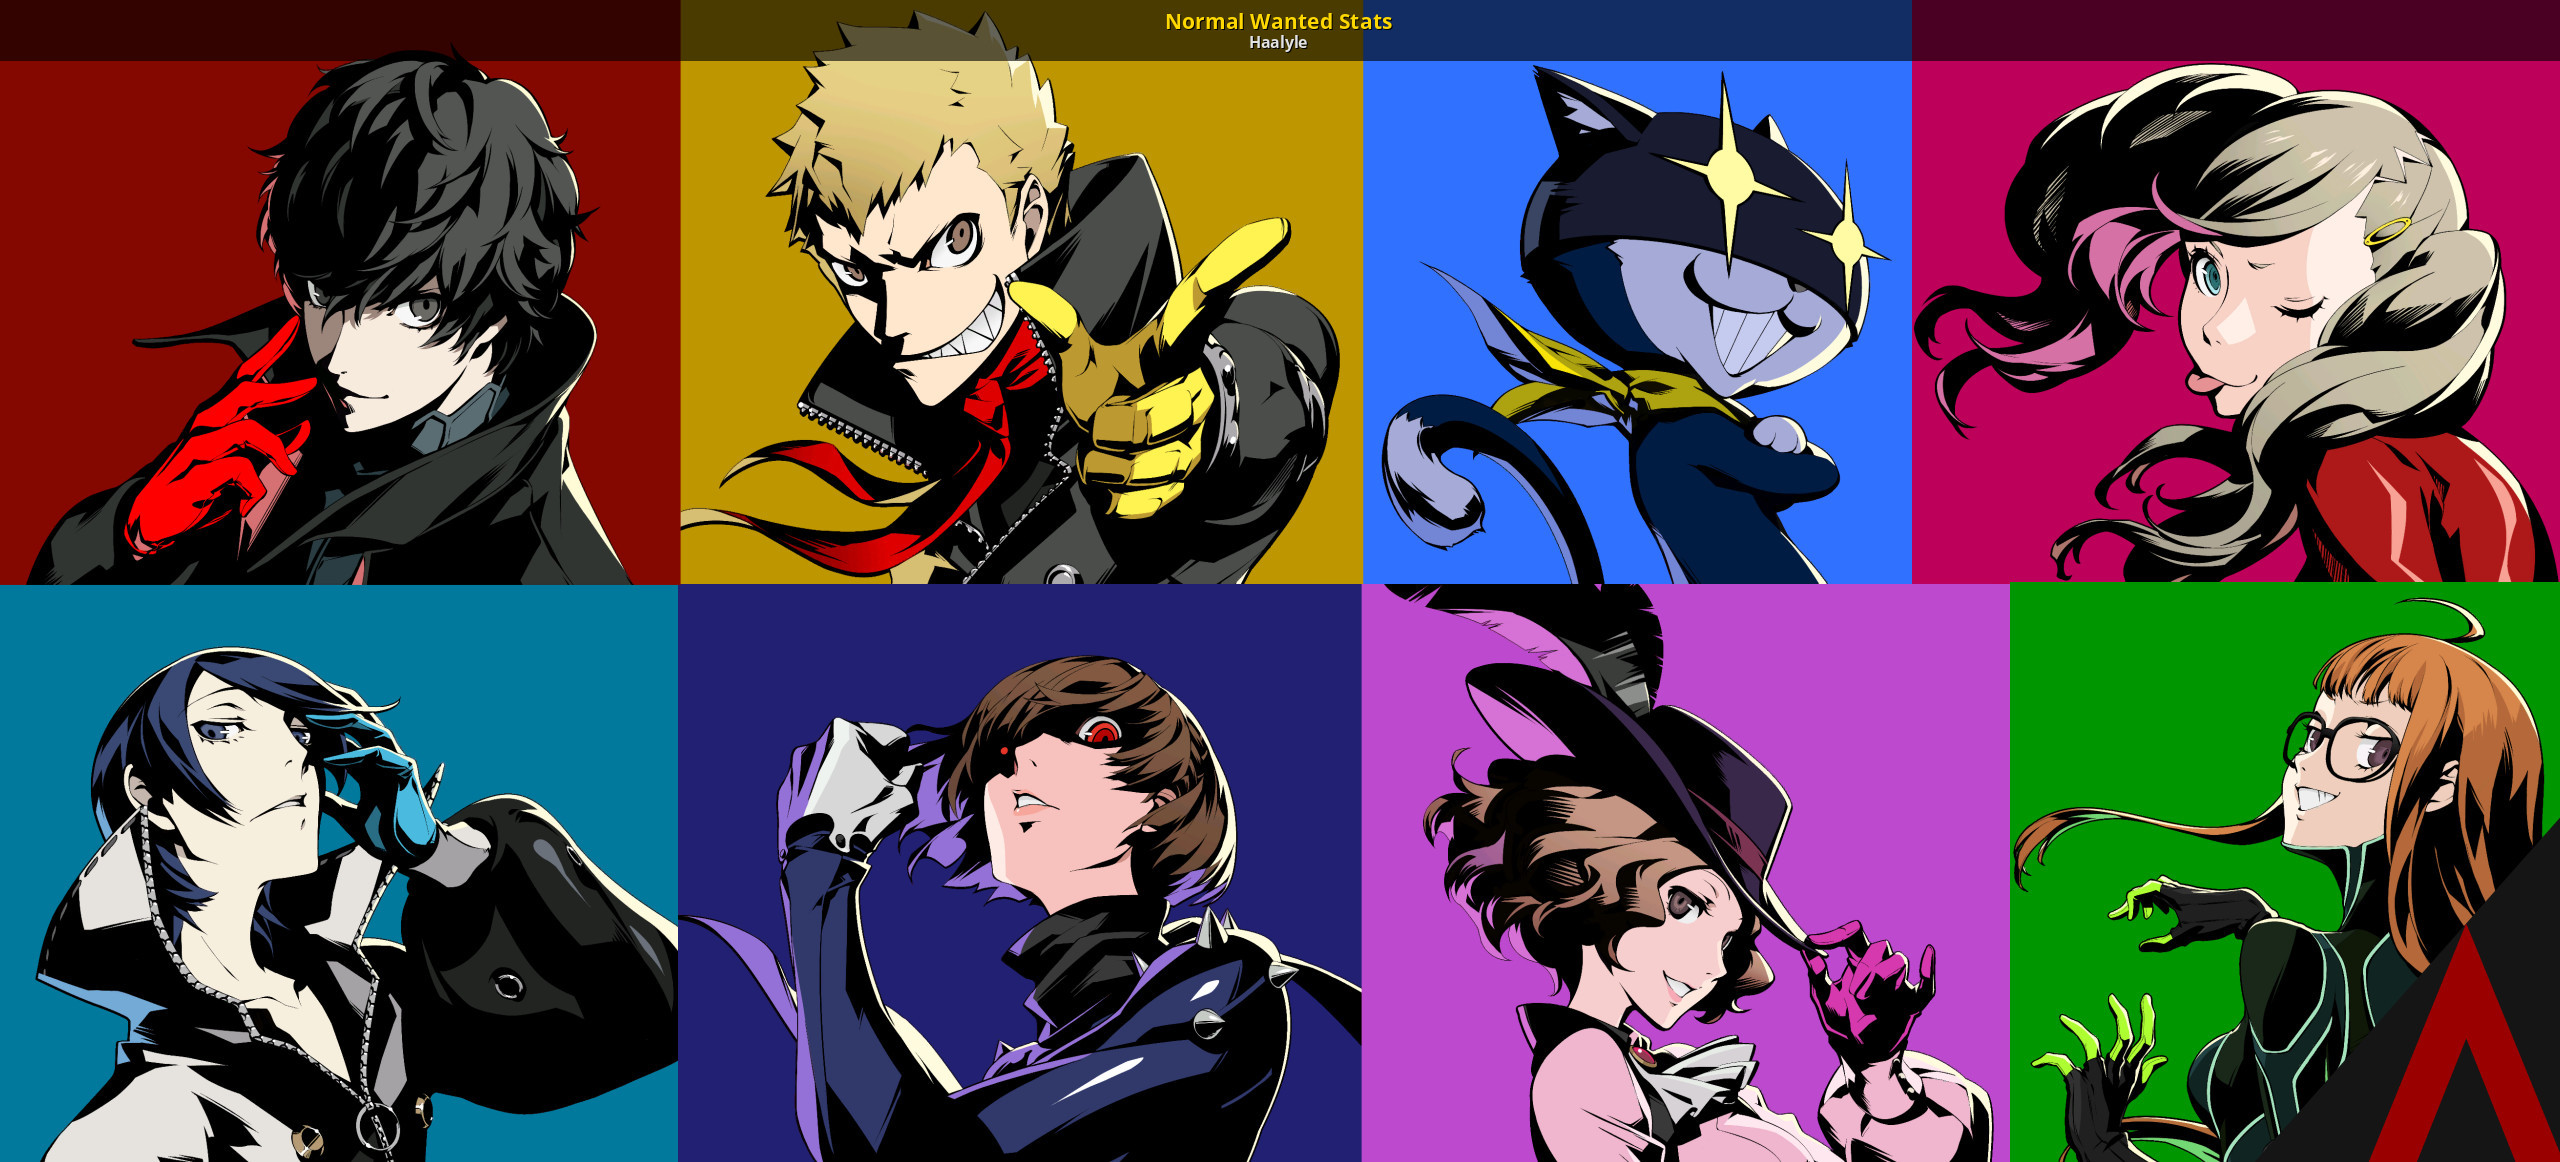 A Persona 5 Strikers (P5S) Mod in the Other/Misc category, submitted by Haa...